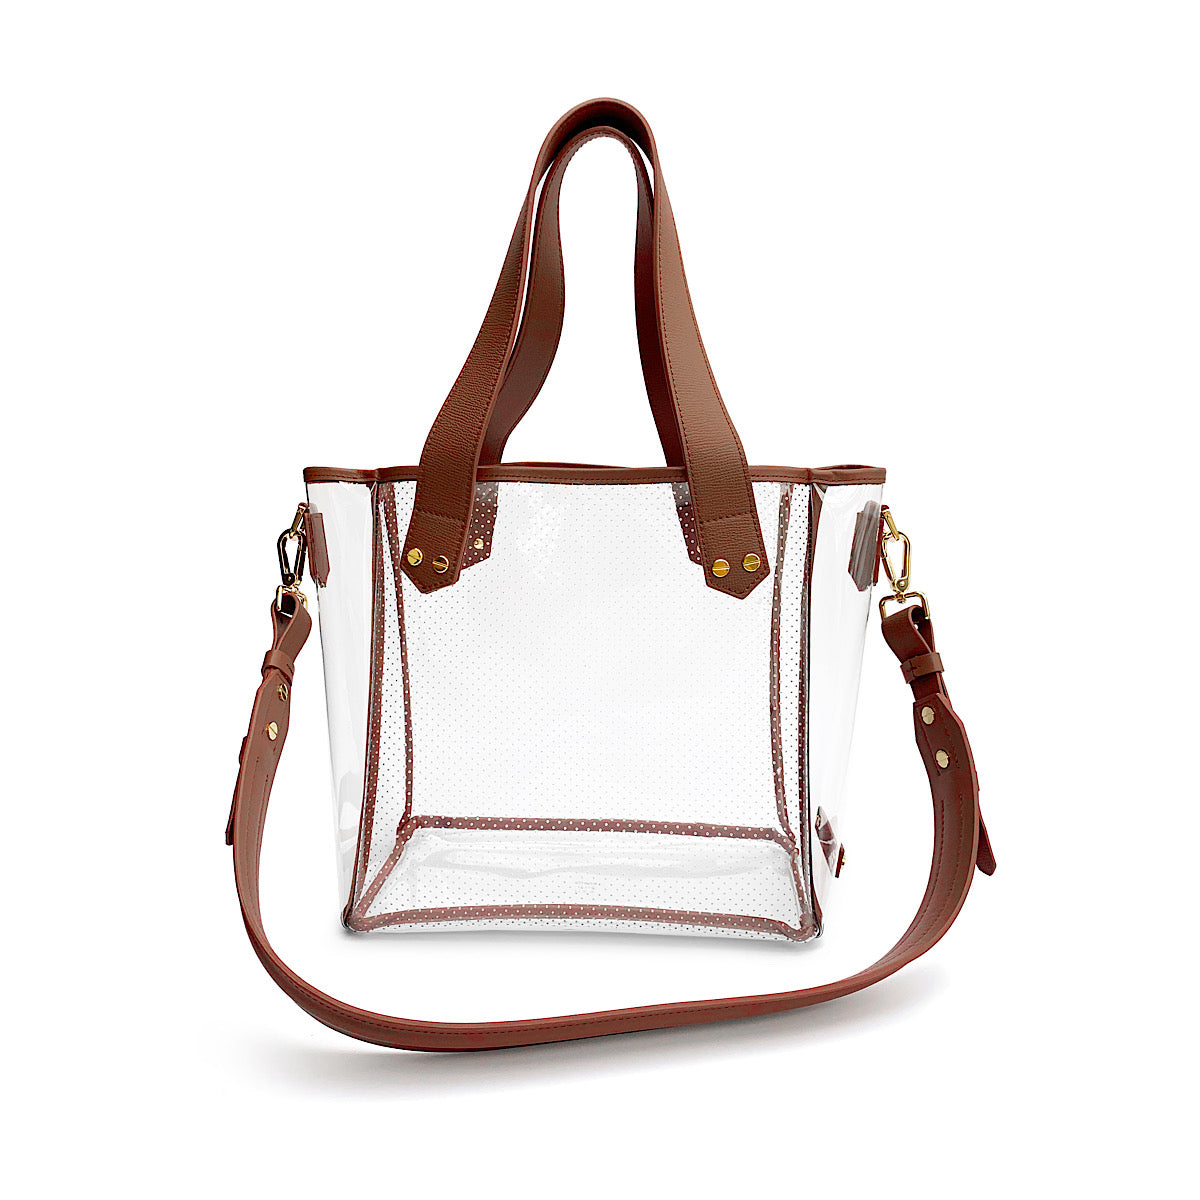 Gameday Bag - Tan Leather / Clear PVC